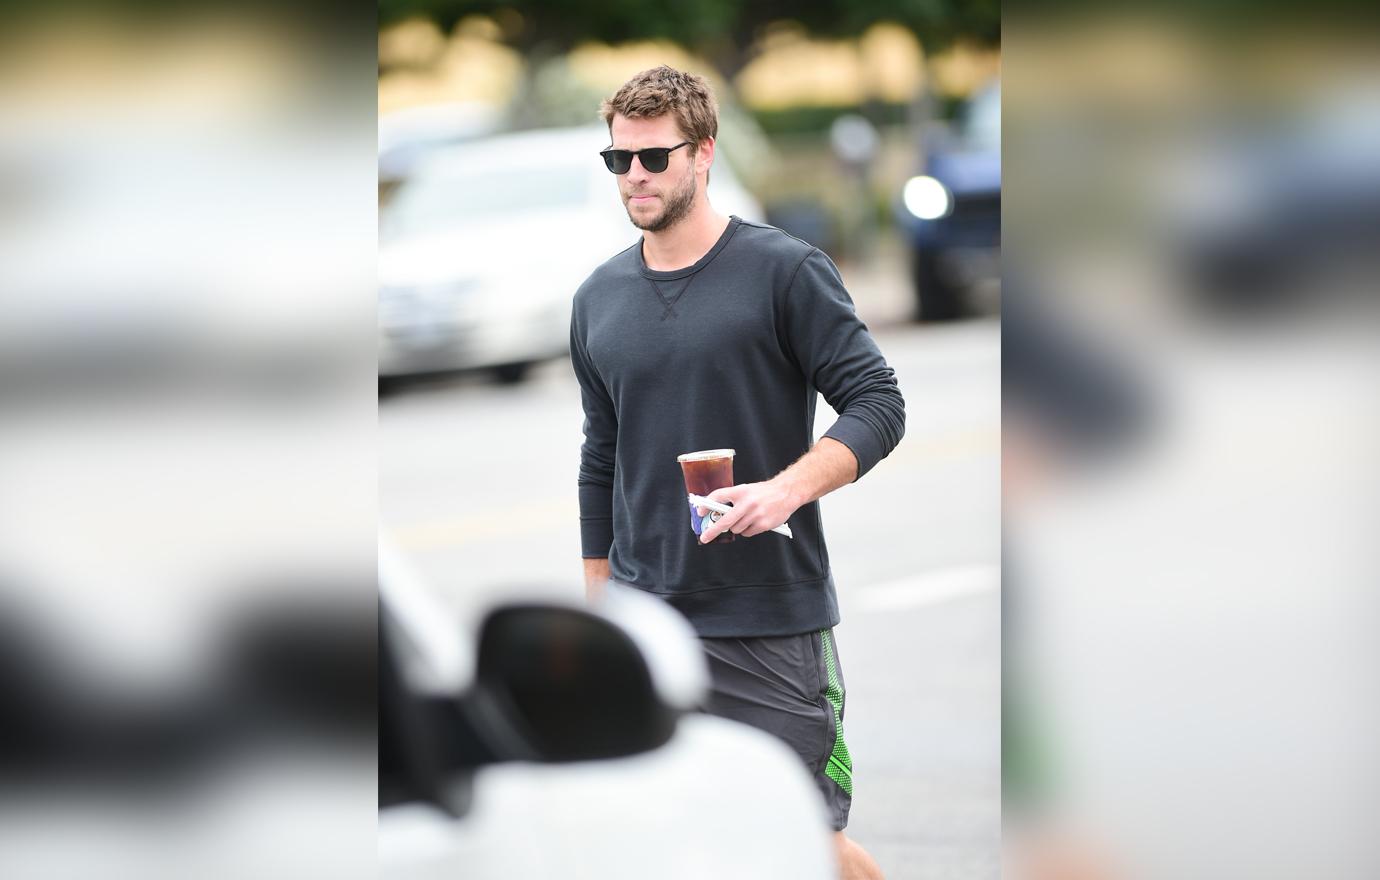 Liam Hemsworth Walking TO His Car Holding An Iced Coffee Looking Serious Wearing Black Sunglasses Shorts and a Long Sleeve Tee